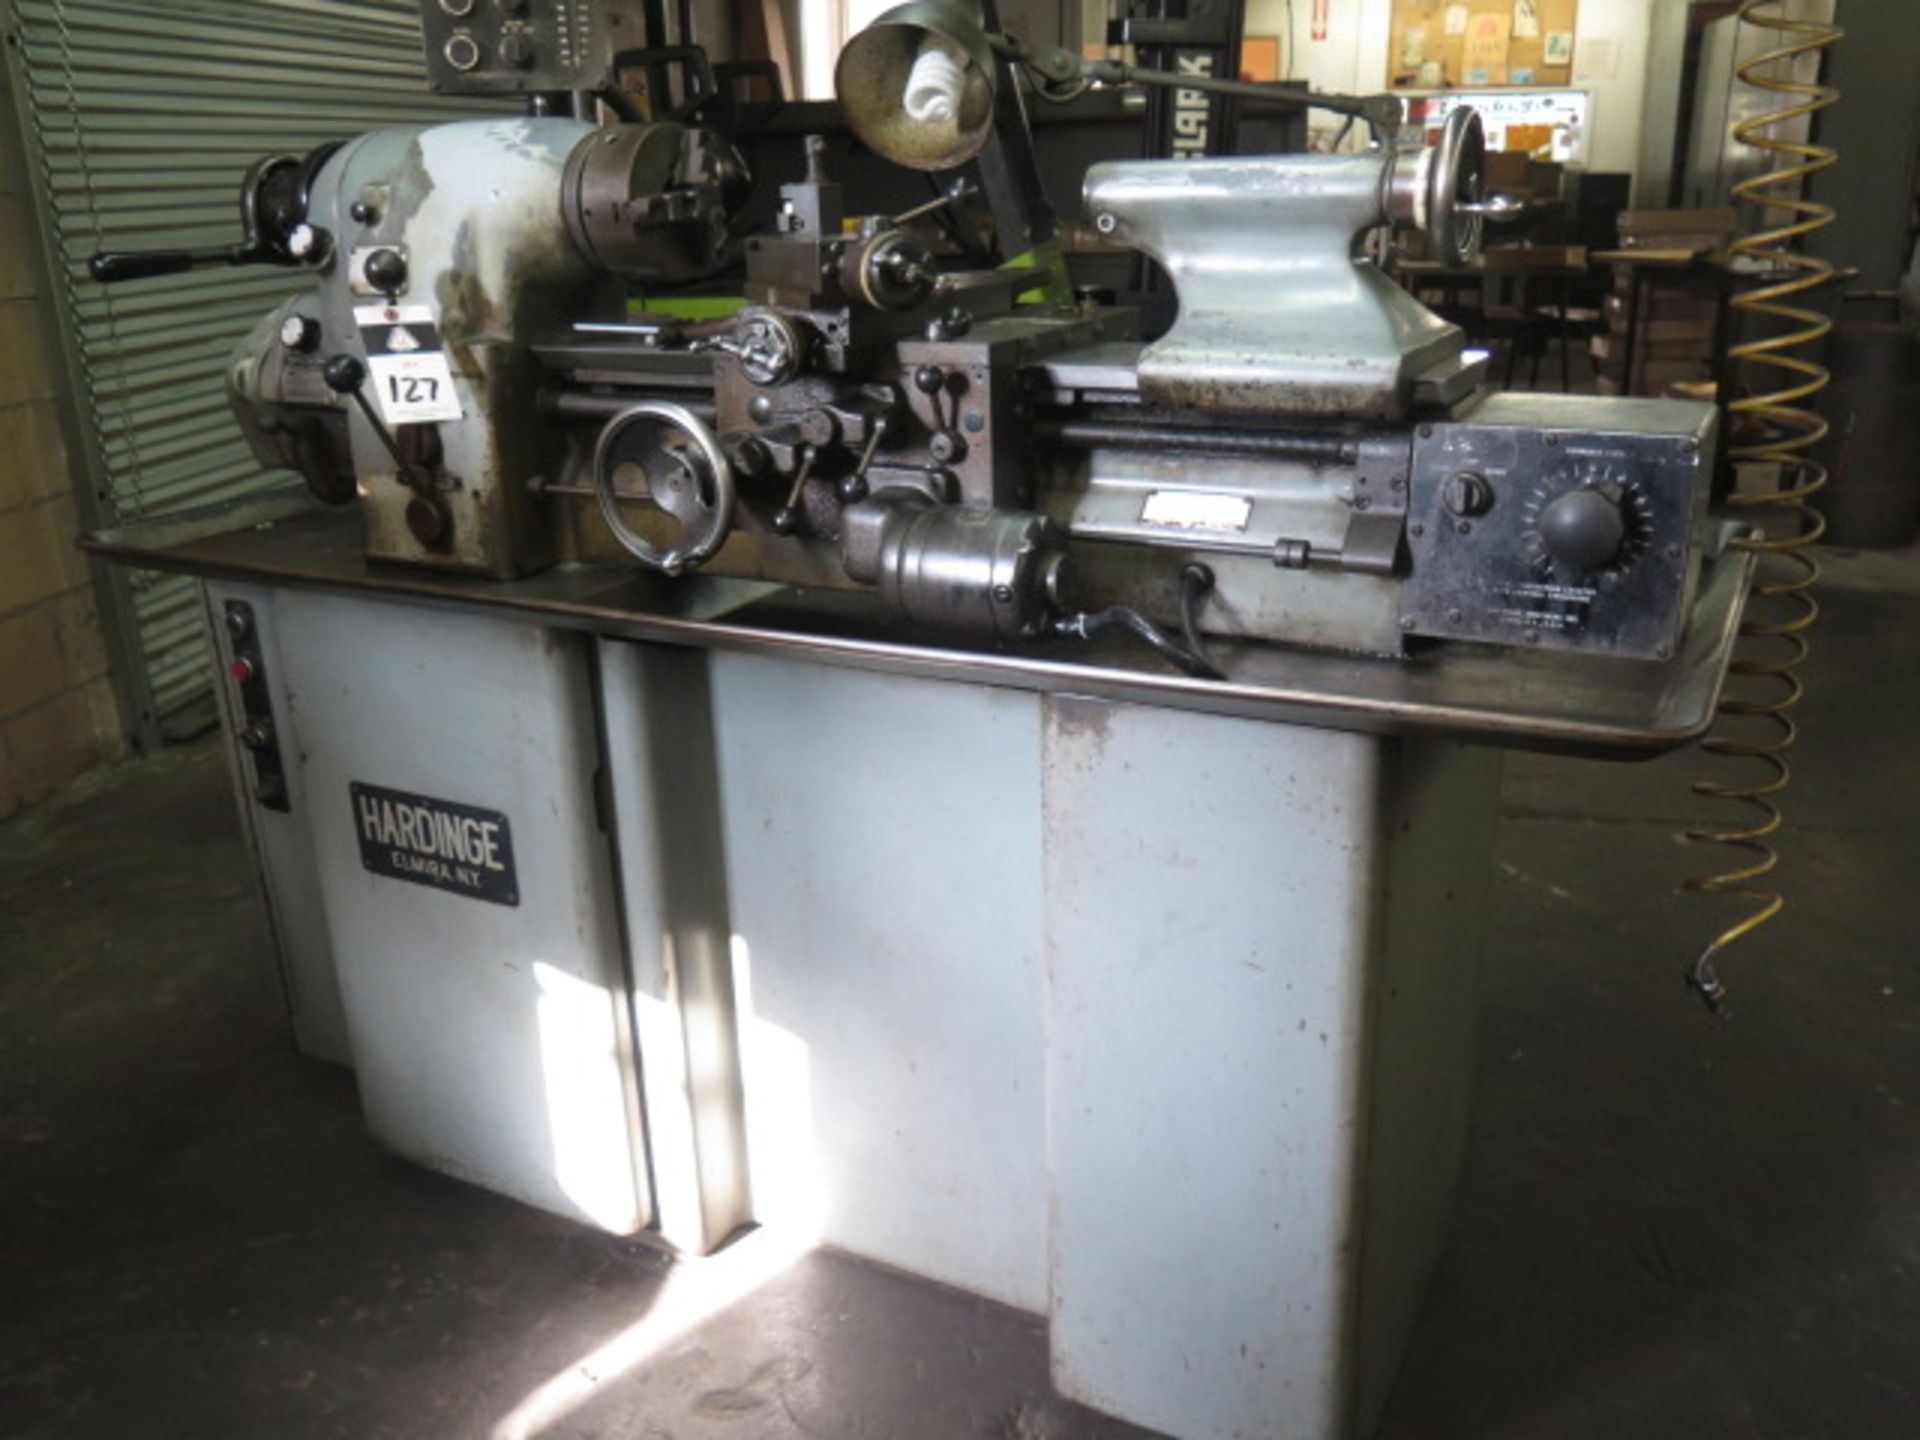 Hardinge HLV-H Tool Room Lathe s/n HLV-H-3244 w/ 125-3000 RPM, Inch Threading, Tailstock, SOLD AS IS - Image 2 of 9